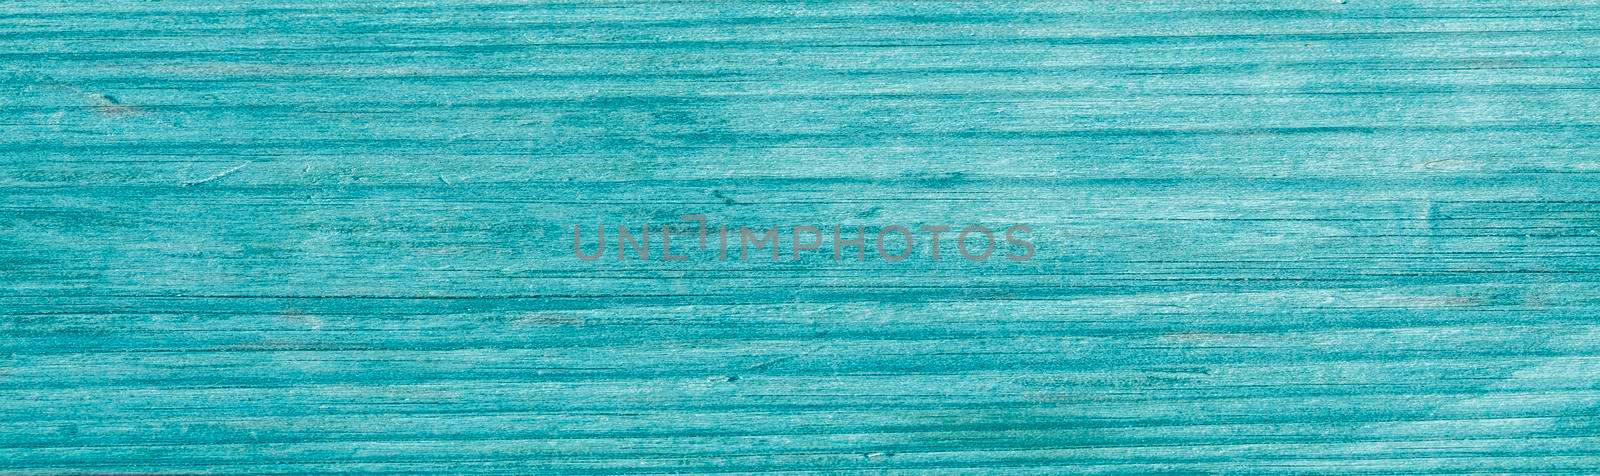 Turquoise wooden banner. Background wooden texture of turquoise color.